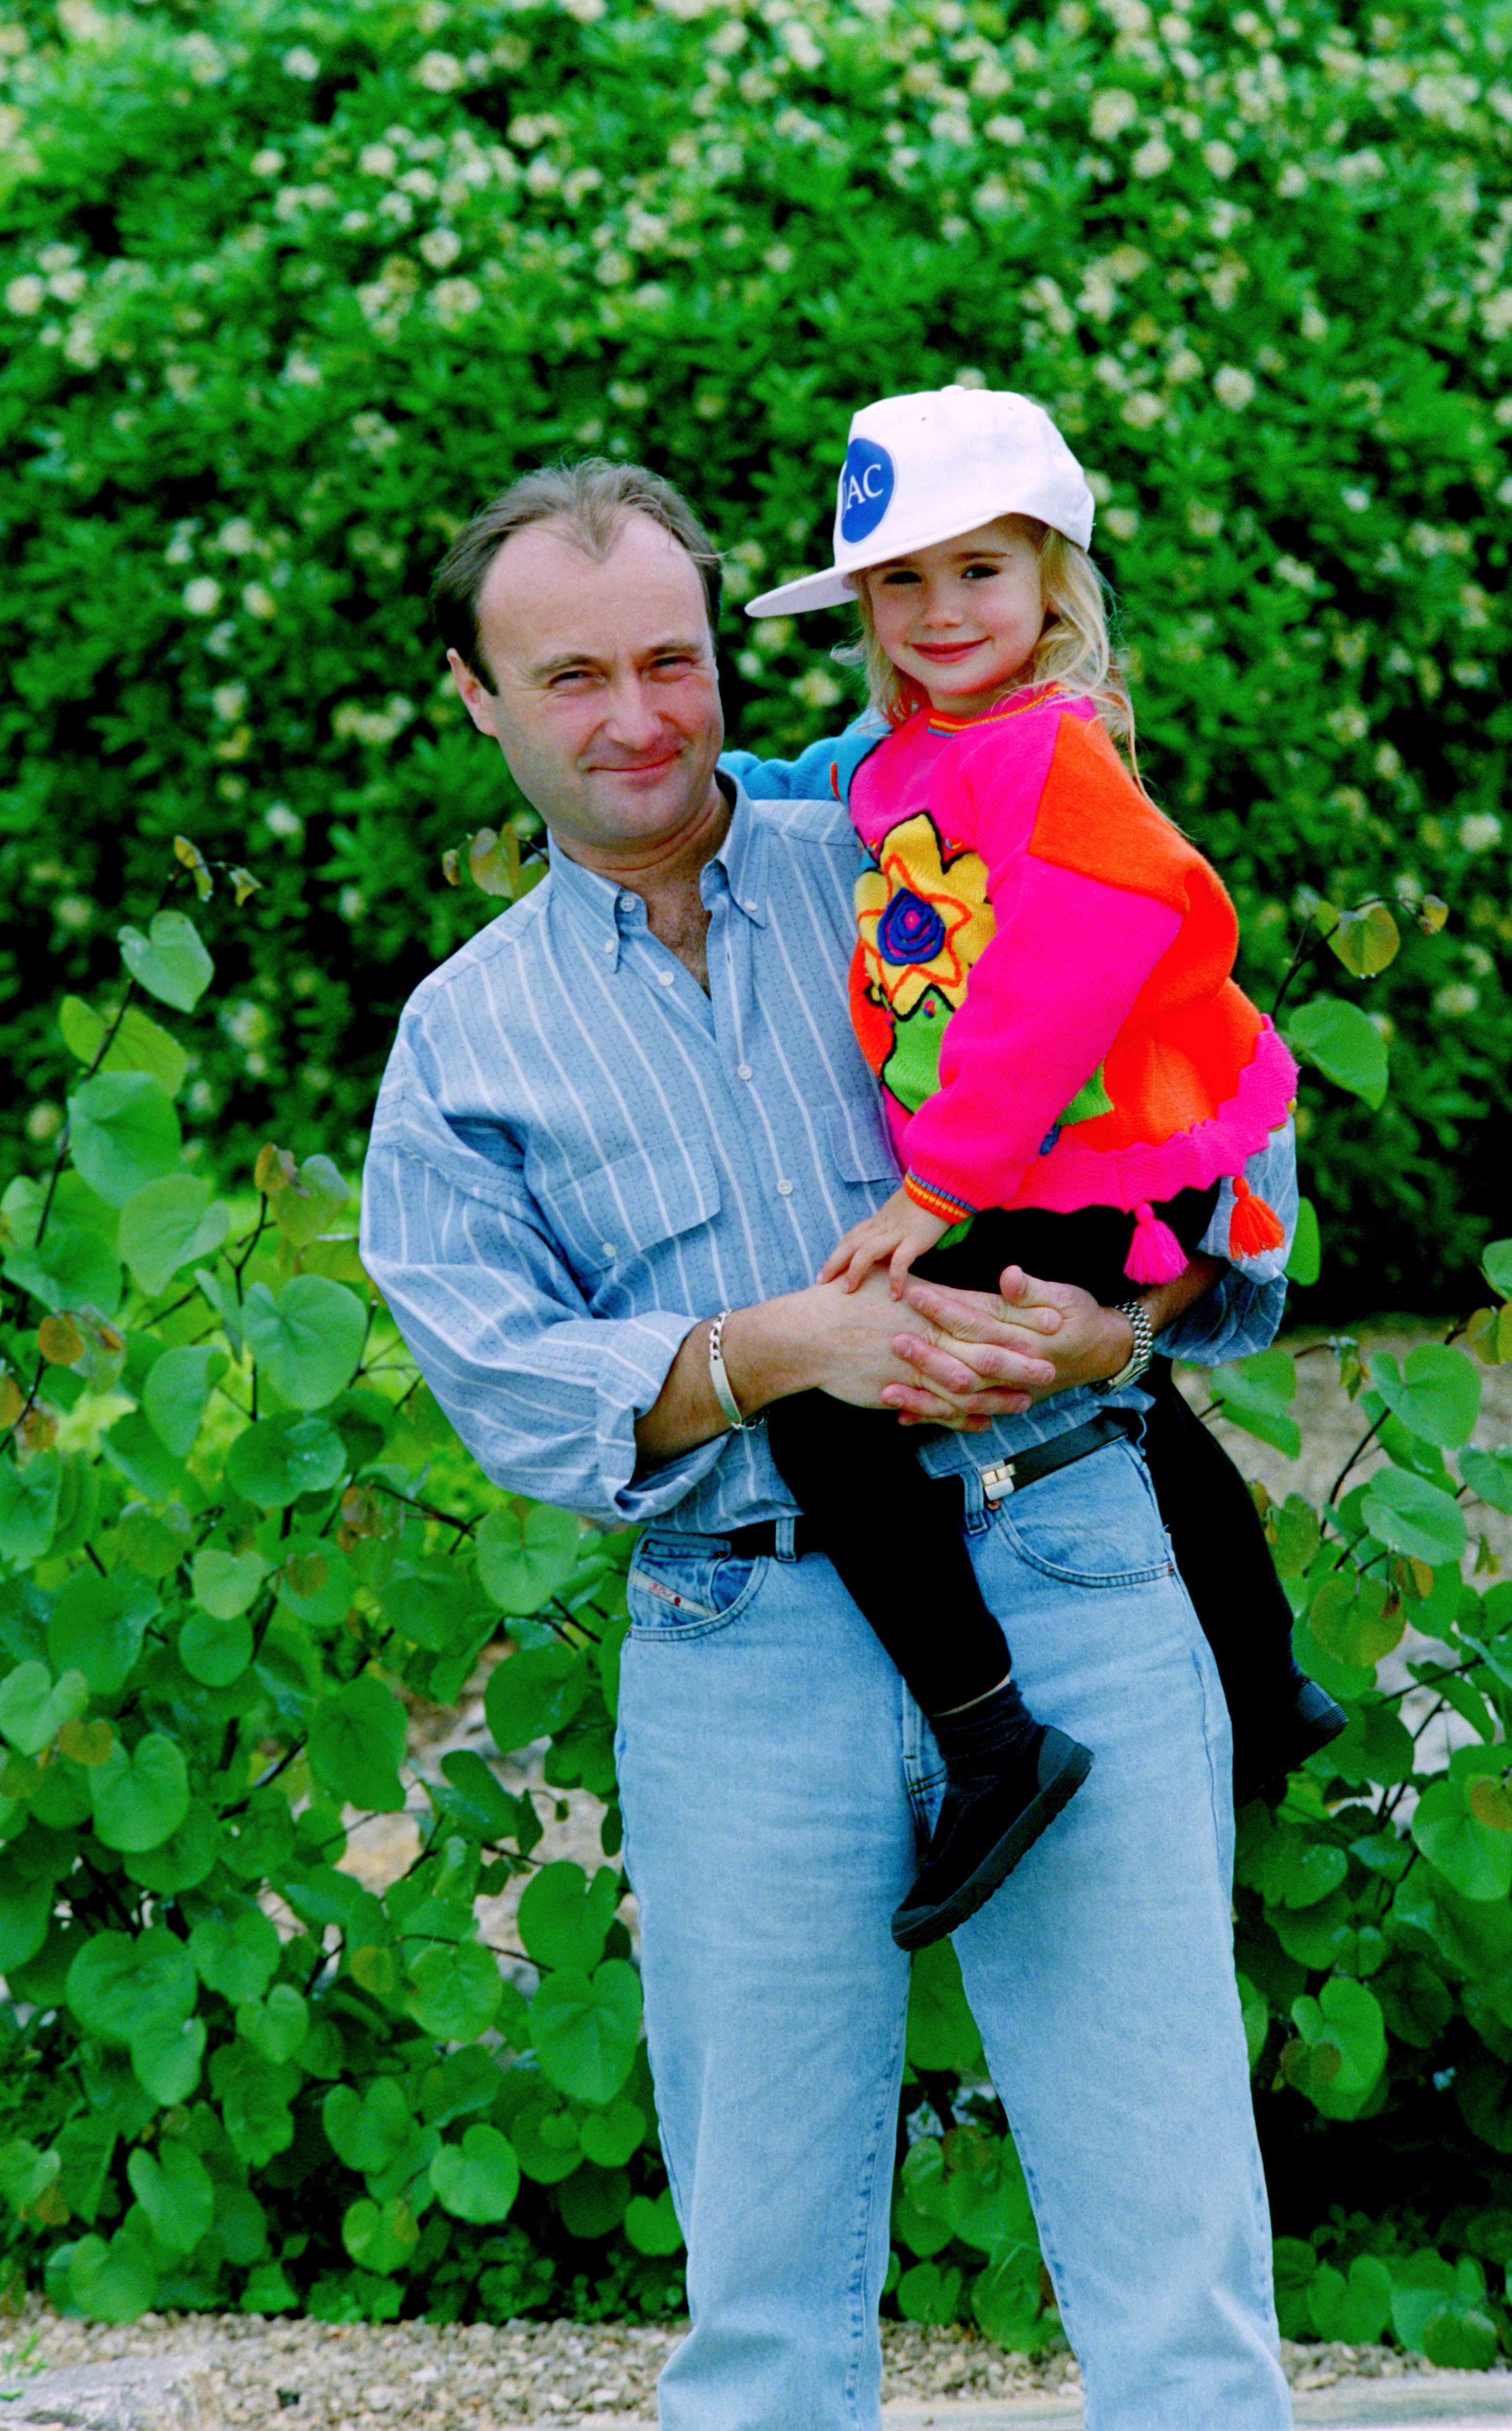 Phil Collins posing with his daughter Lily Collins